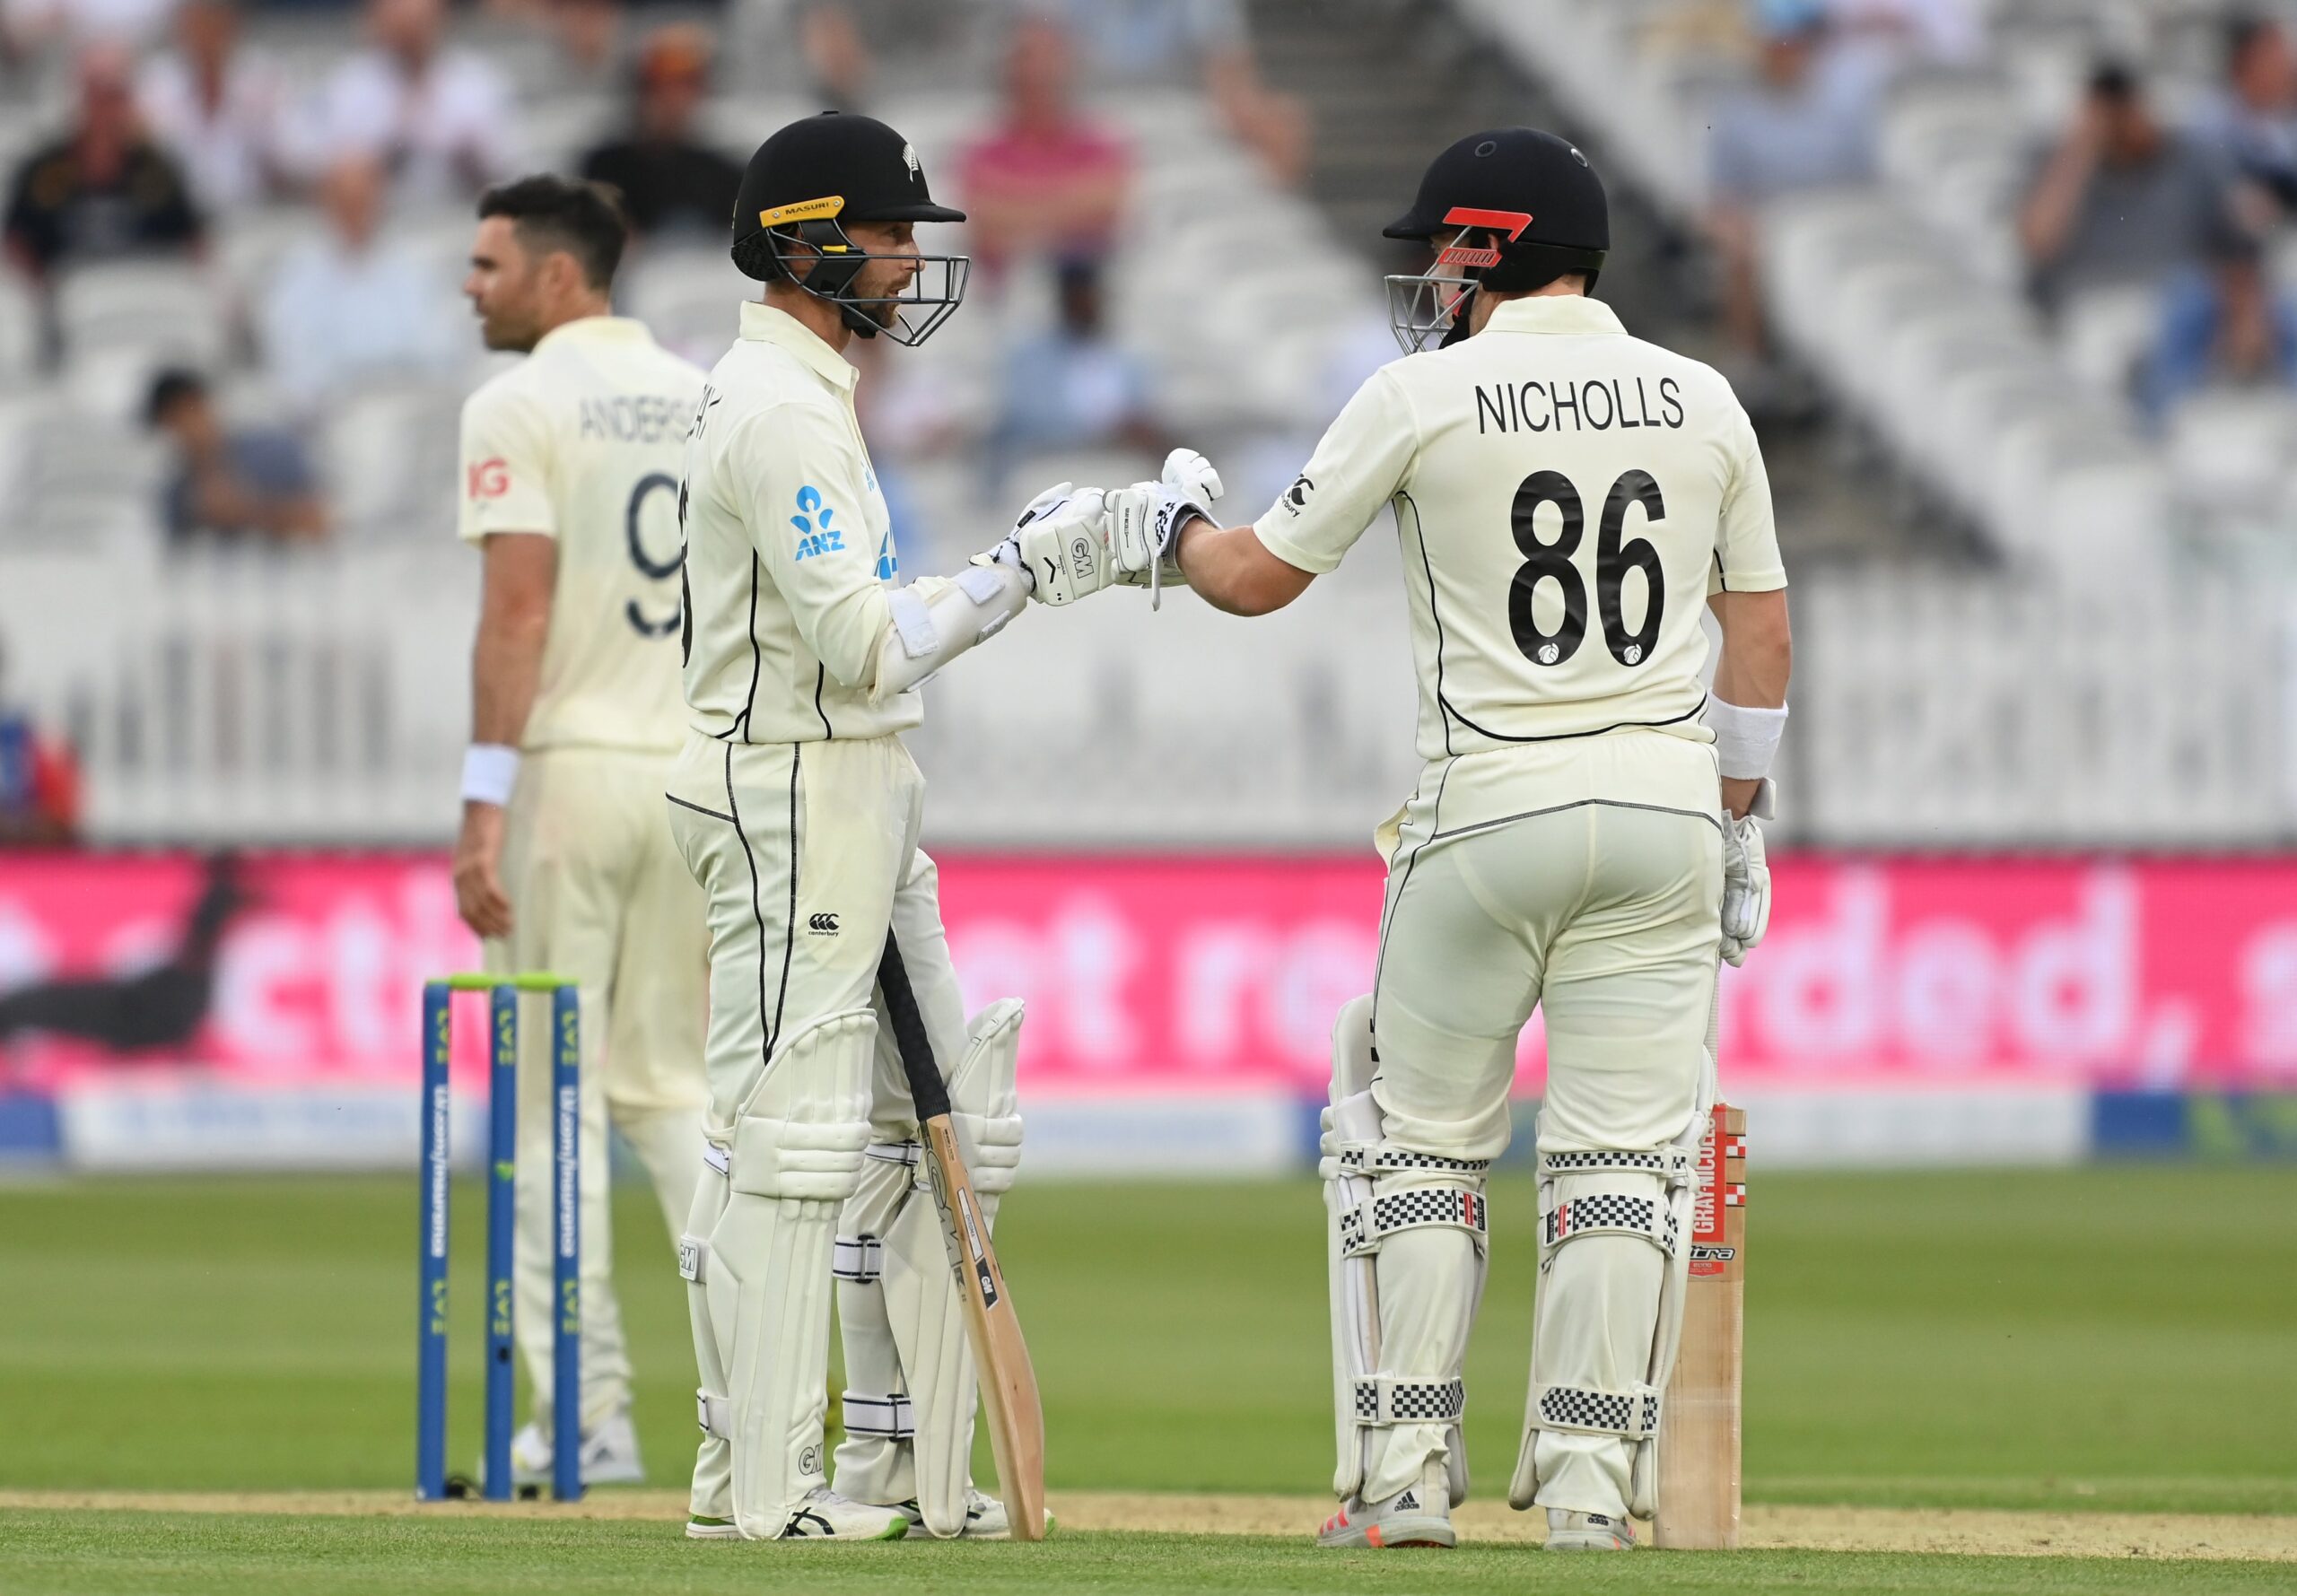 NZ vs BAN: New Zealand's Predicted Playing XI vs Bangladesh, New Zealand vs Bangladesh 2022, First Test